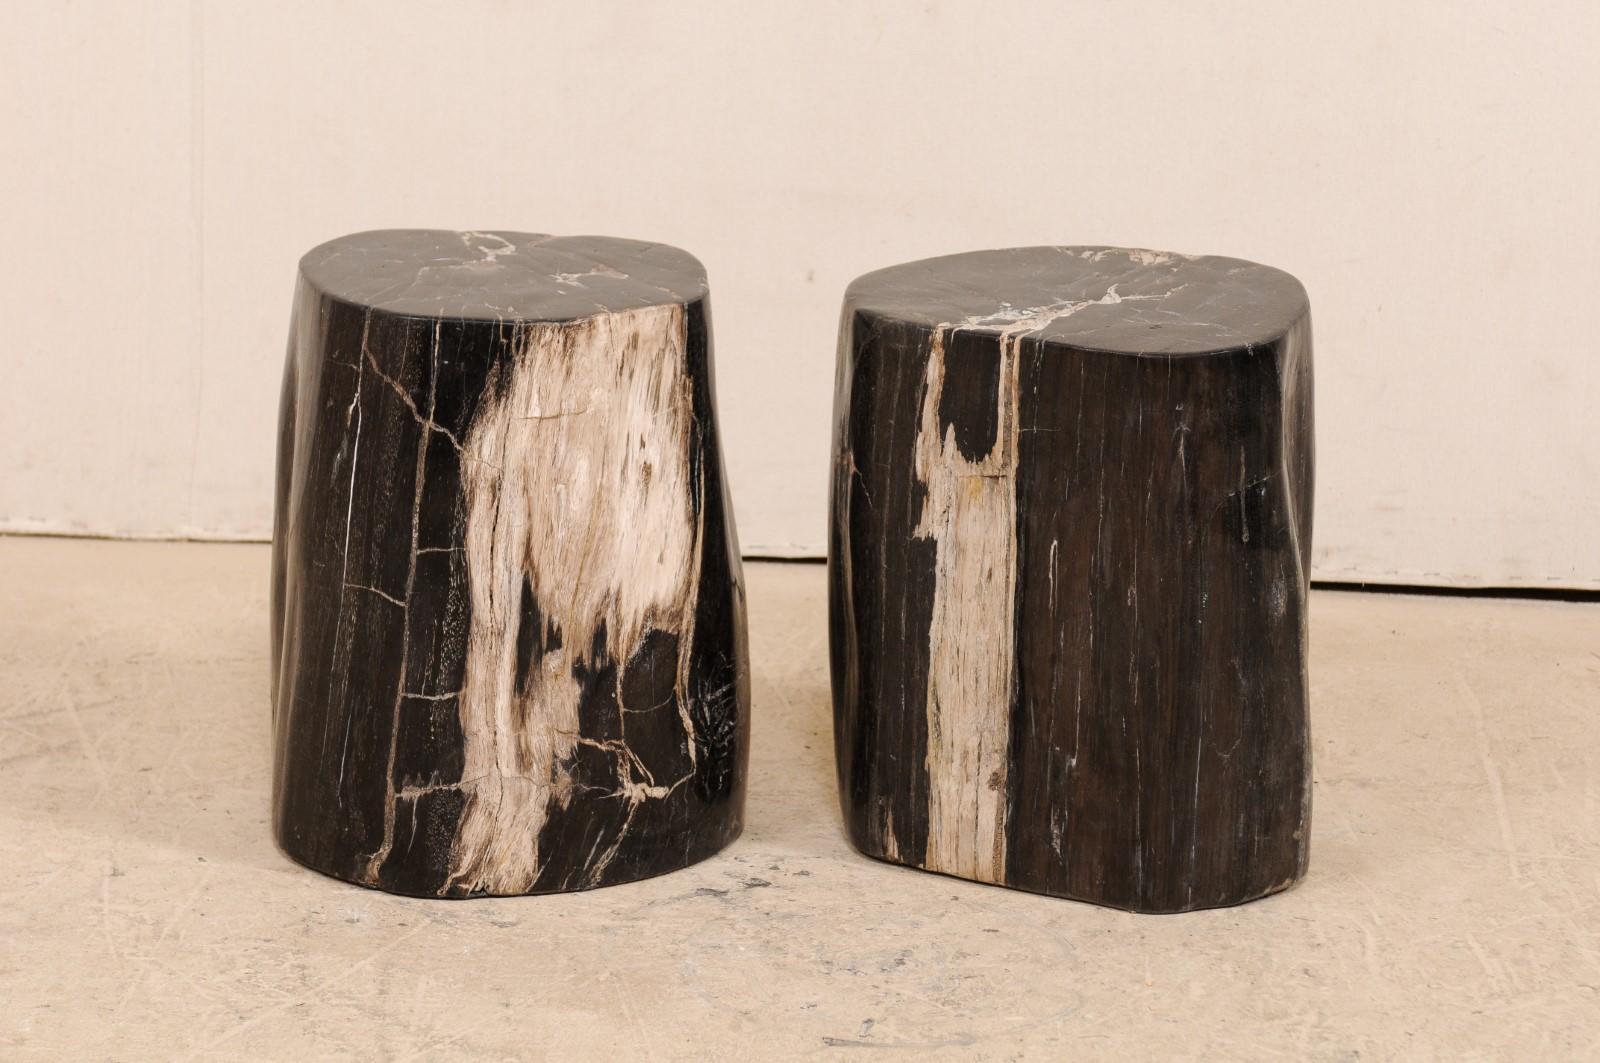 Polished Pair of Petrified Wood Drink Tables in Rich Black Color with Streaks of Cream